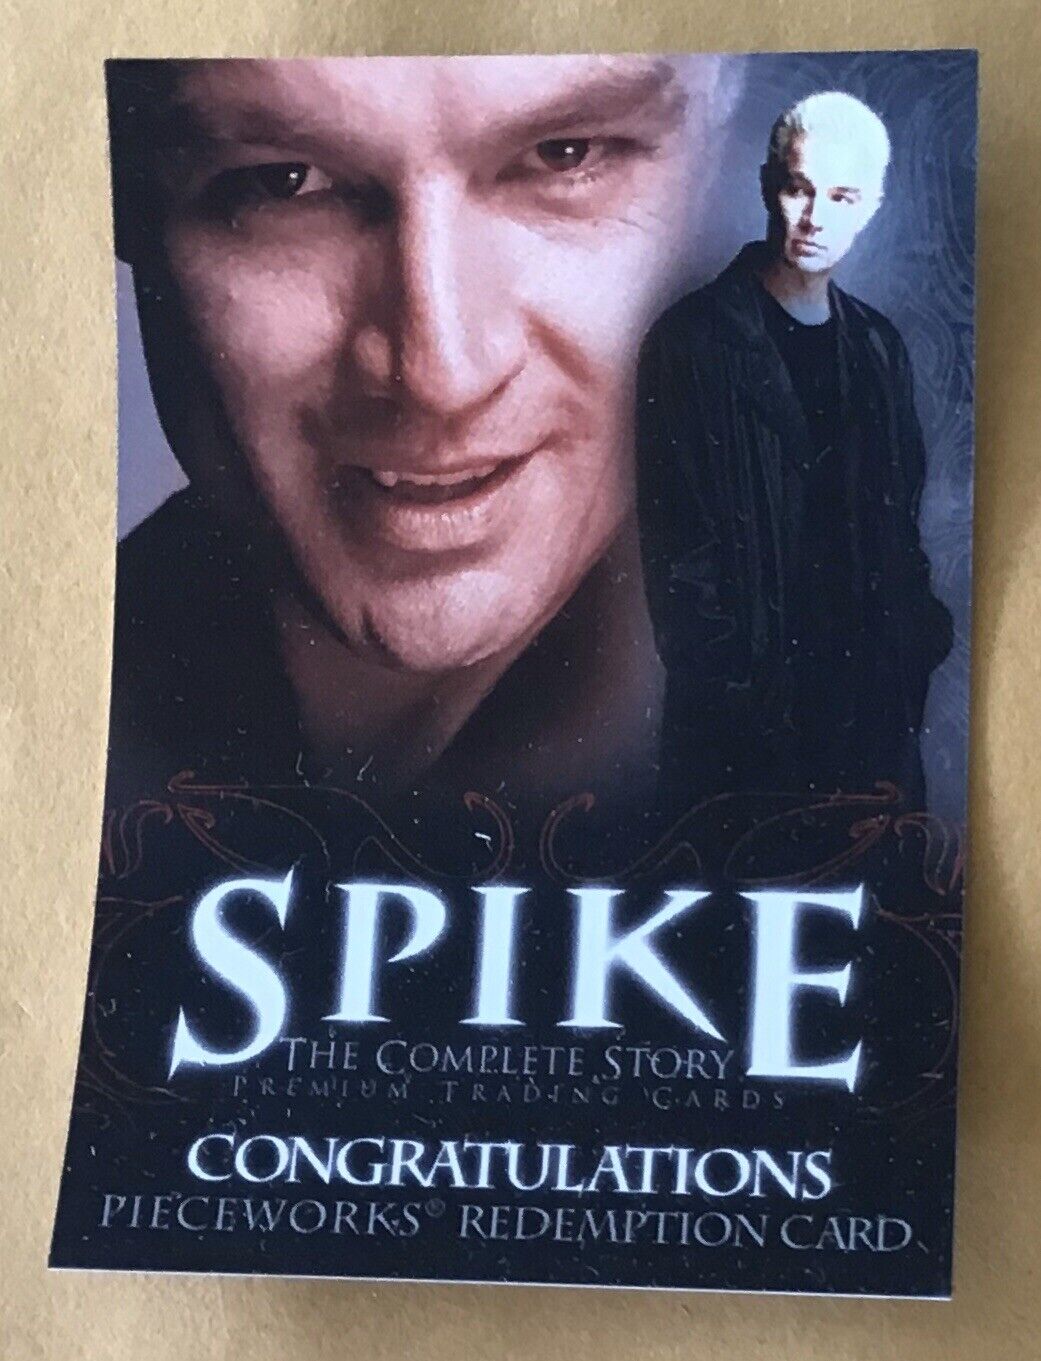 2005 Inkworks Spike The Complete Story James Marsters Redemption Cards EXPIRED